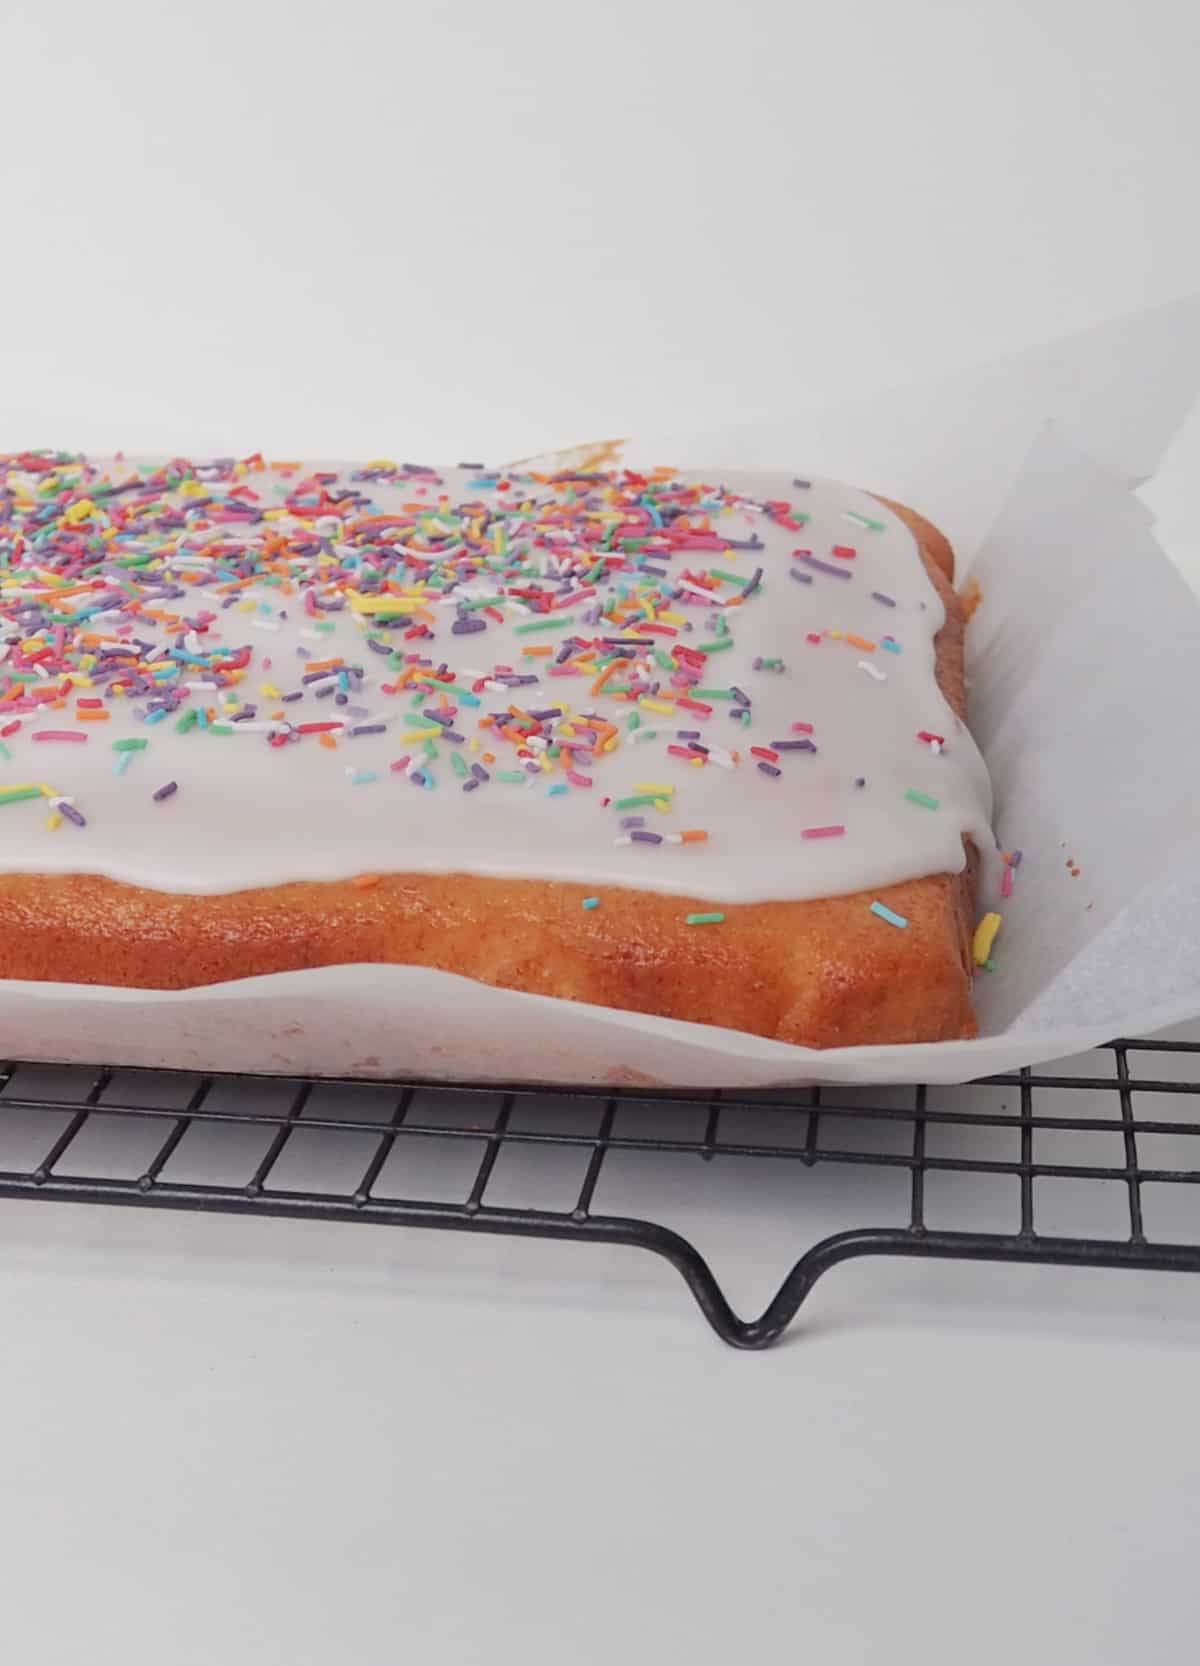 Vanilla Sheet Cake iced with a white frosting and decorated with sprinkles sitting on a sheet of baking paper on a wire rack.